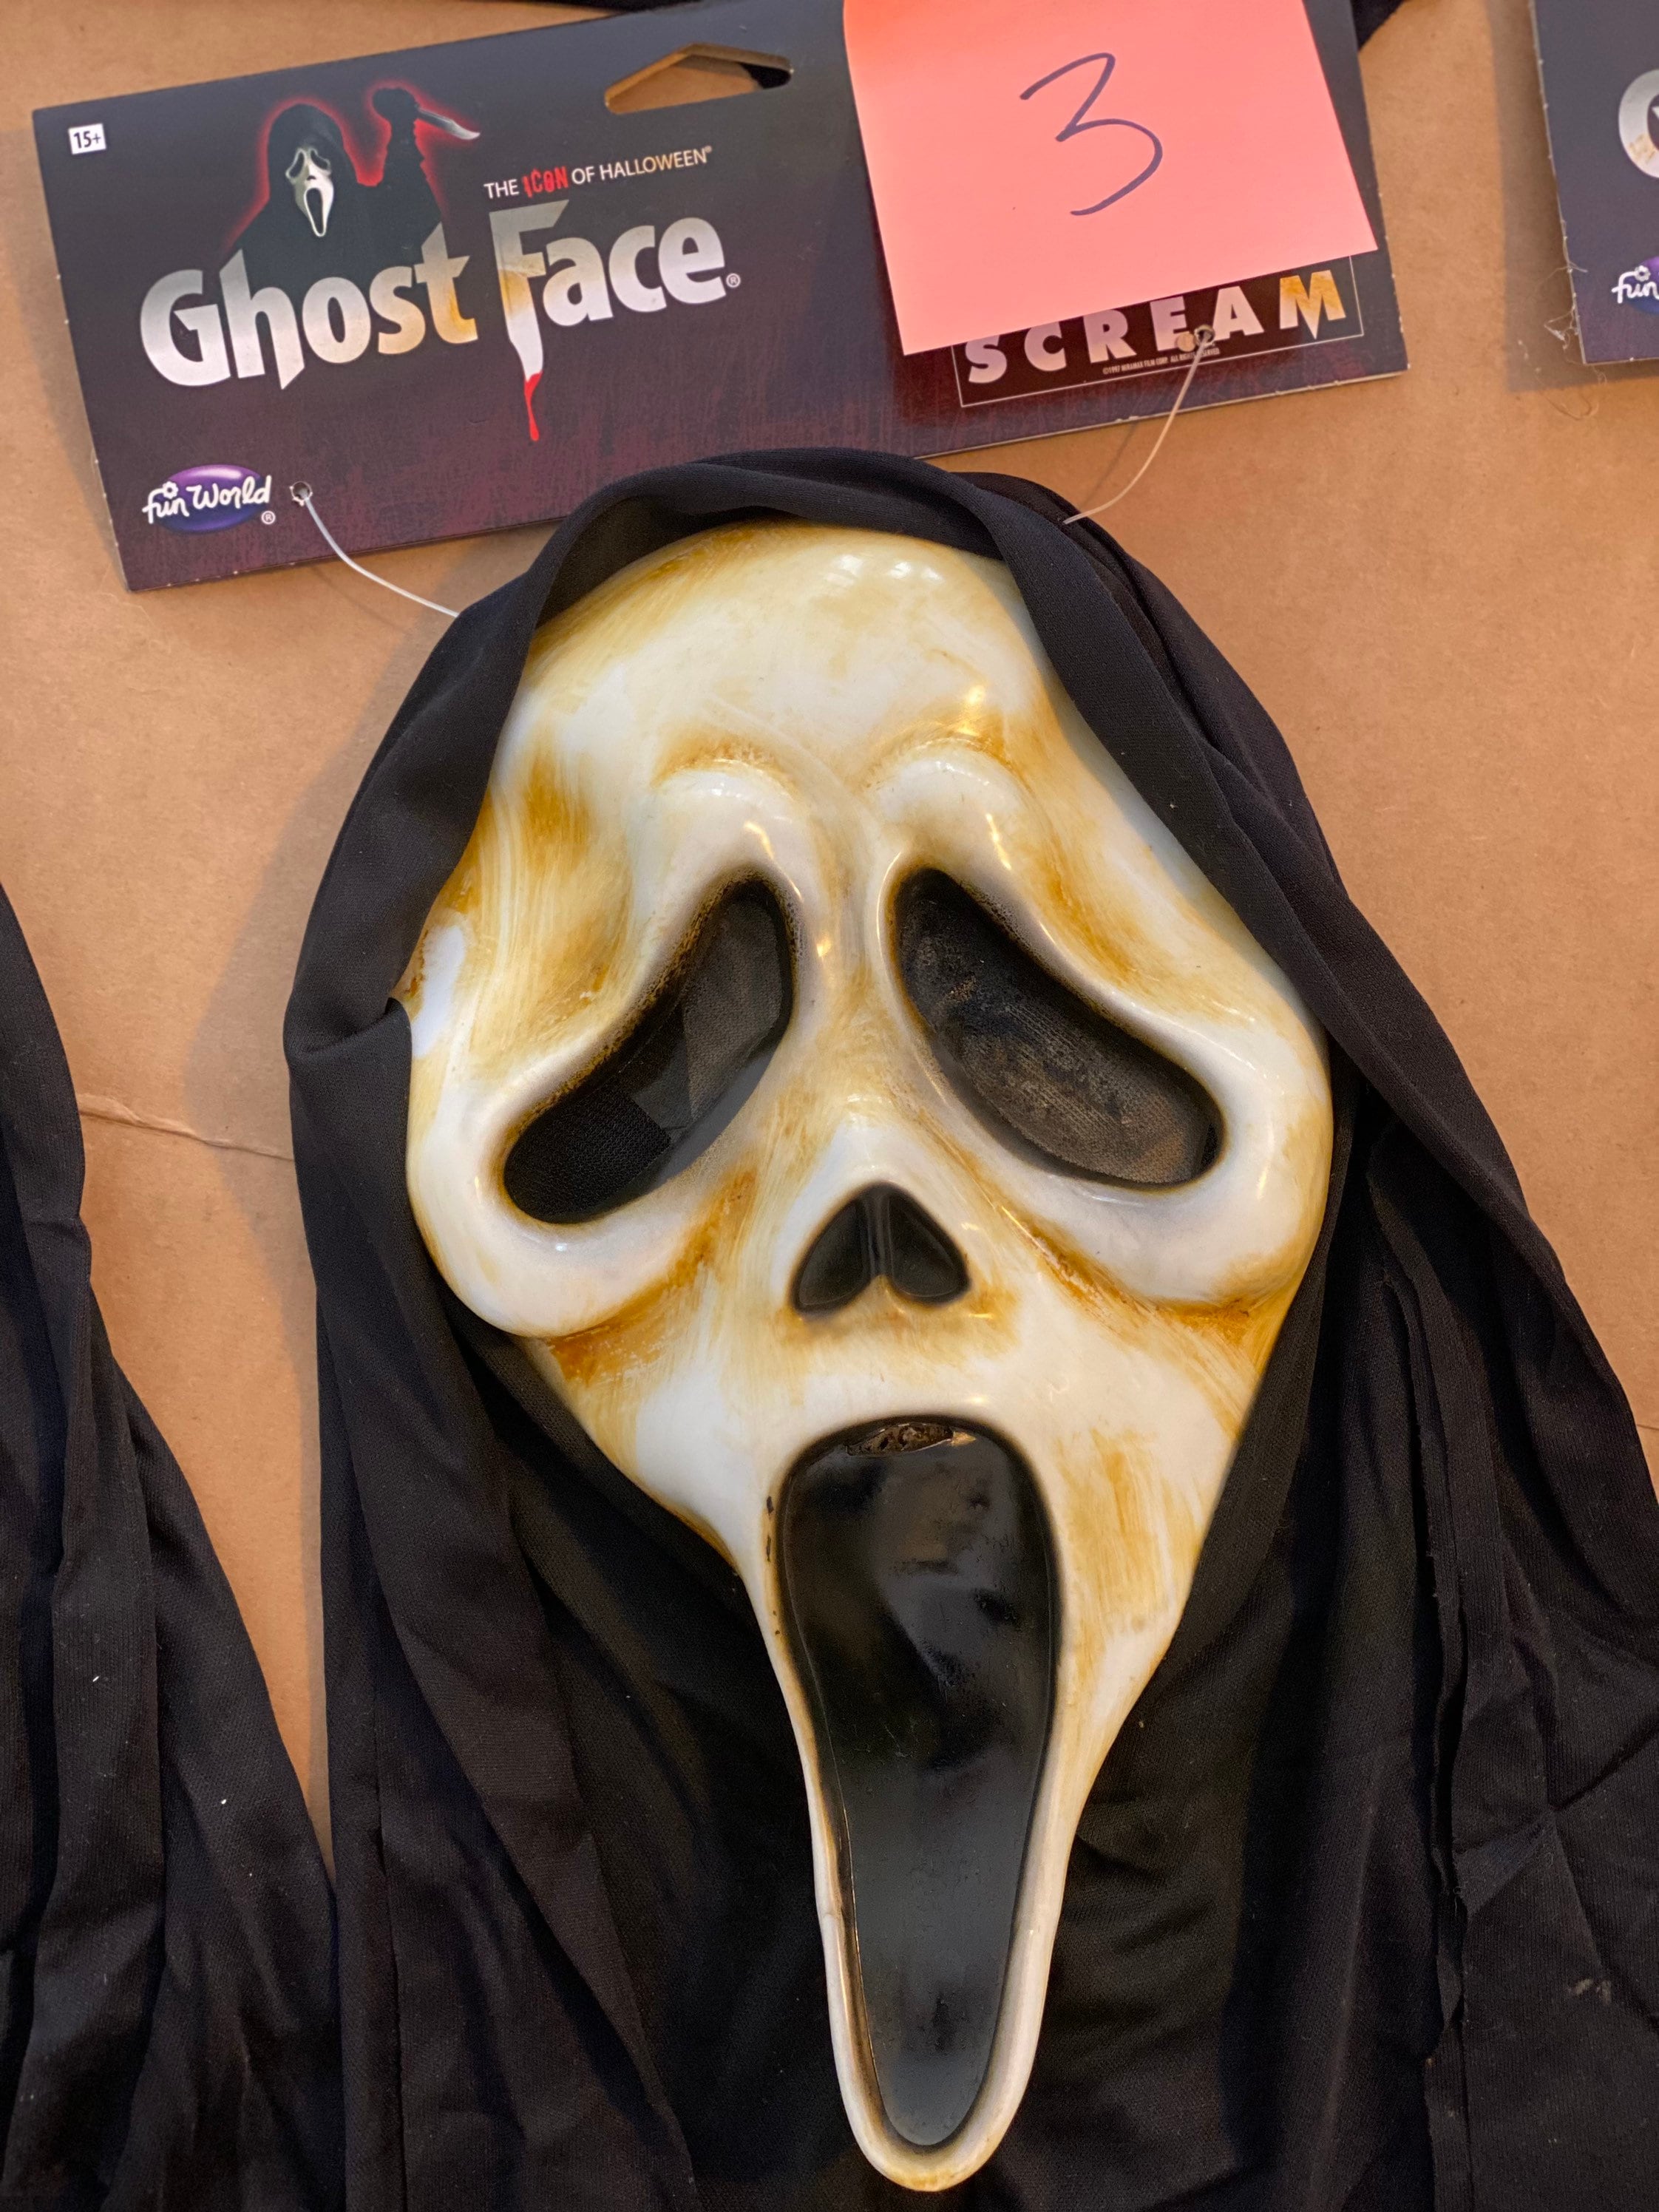 Scary Movie Smiley Ghost Face With Shroud Costume Mask With flaws